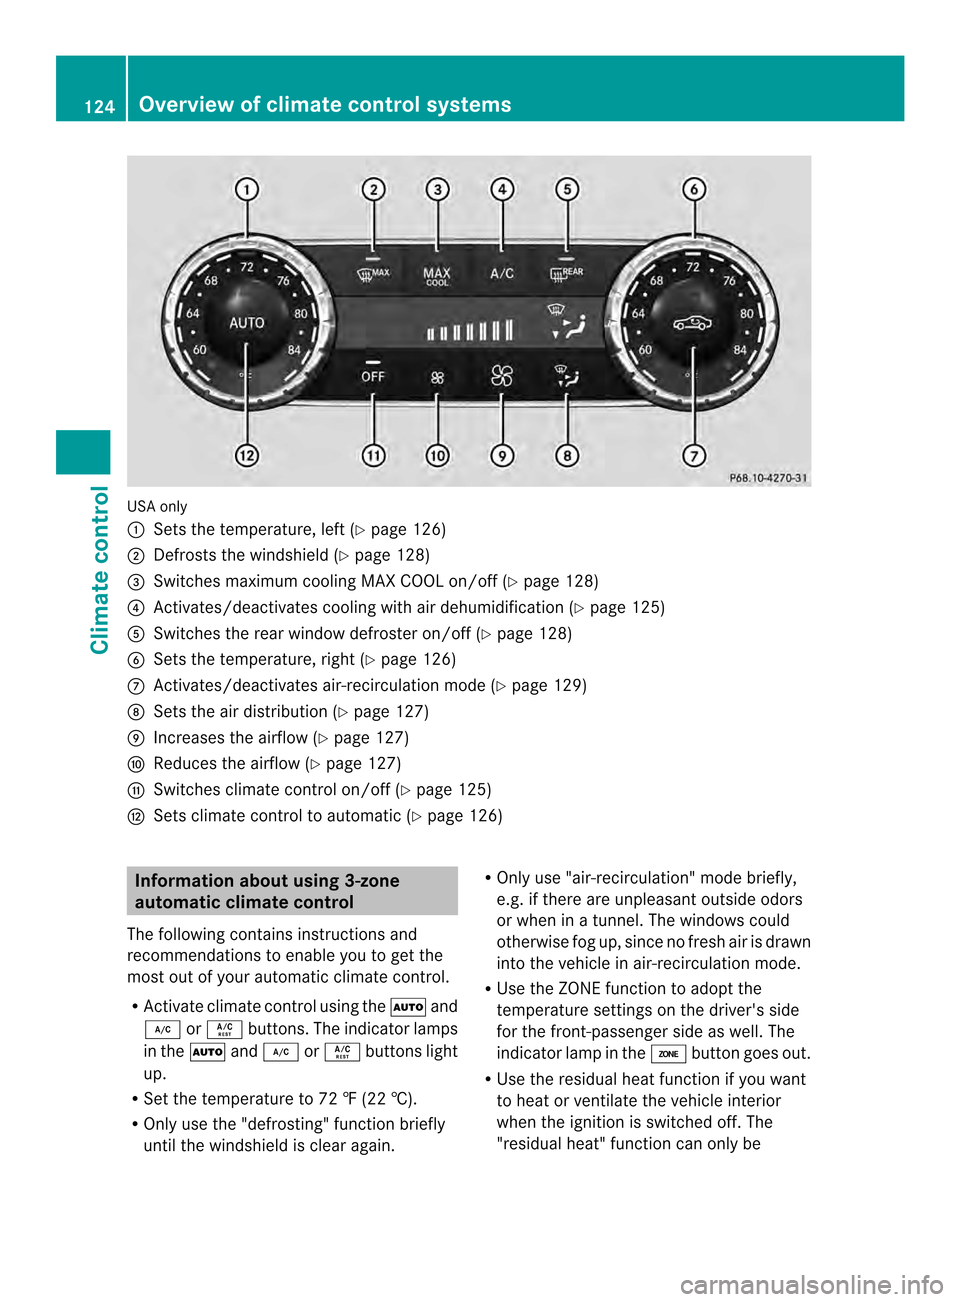 MERCEDES-BENZ SLK-Class 2013 R172 Owners Manual USA only
0003
Sets the temperature, left (Y page 126)
0004 Defrosts the windshield (Y page 128)
0024 Switches maximum cooling MAX COOL on/off (Y page 128)
0023 Activates/deactivates cooling with air d